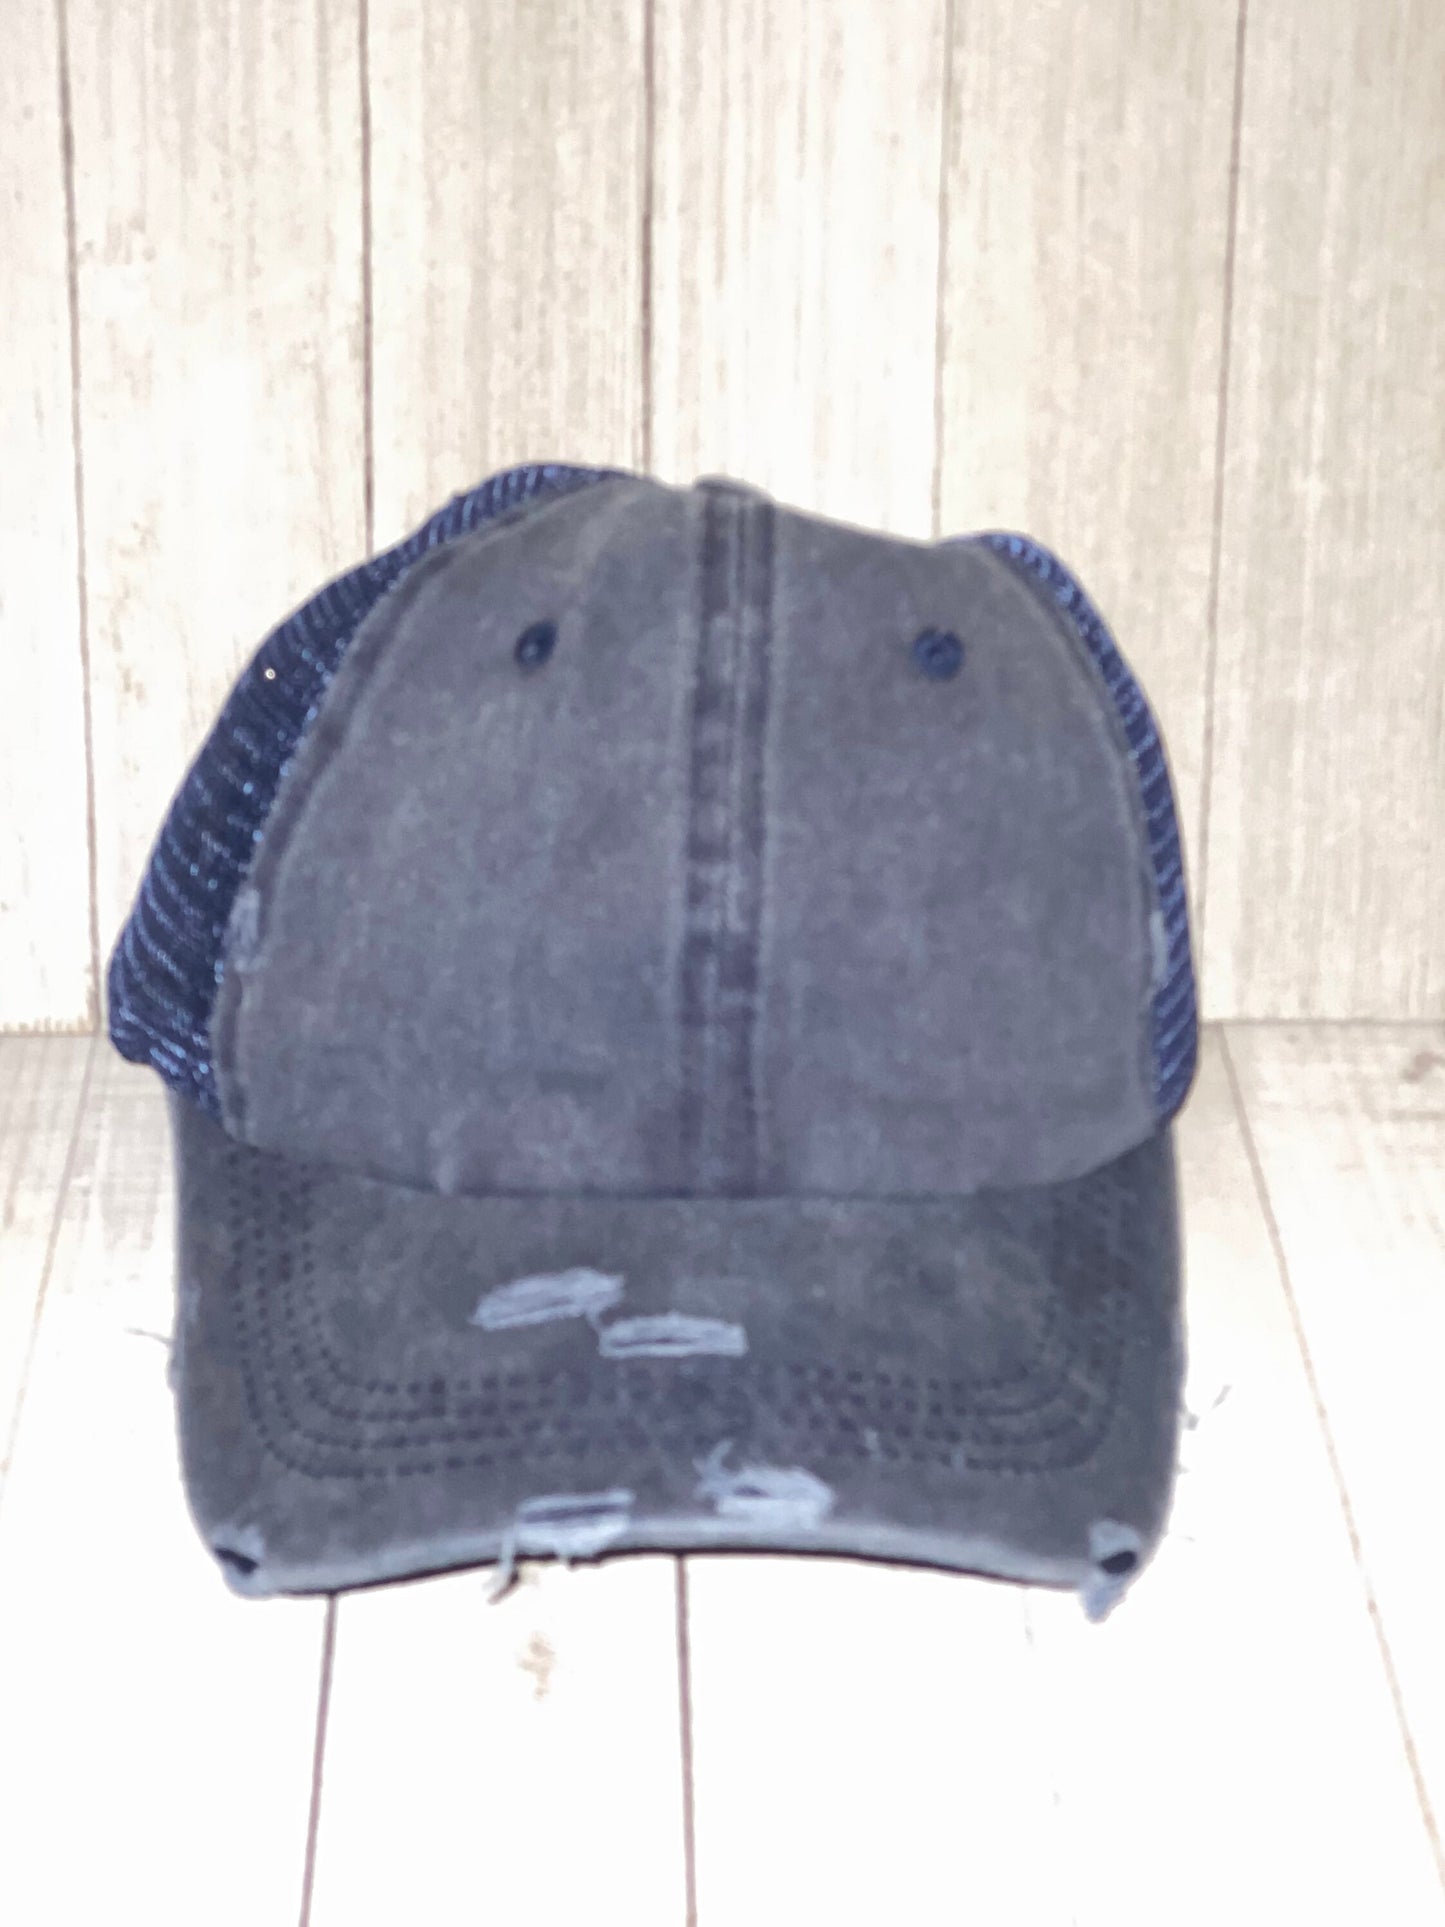 Distressed Messy Bun Hat, Personalized, Initial, Trucker hat